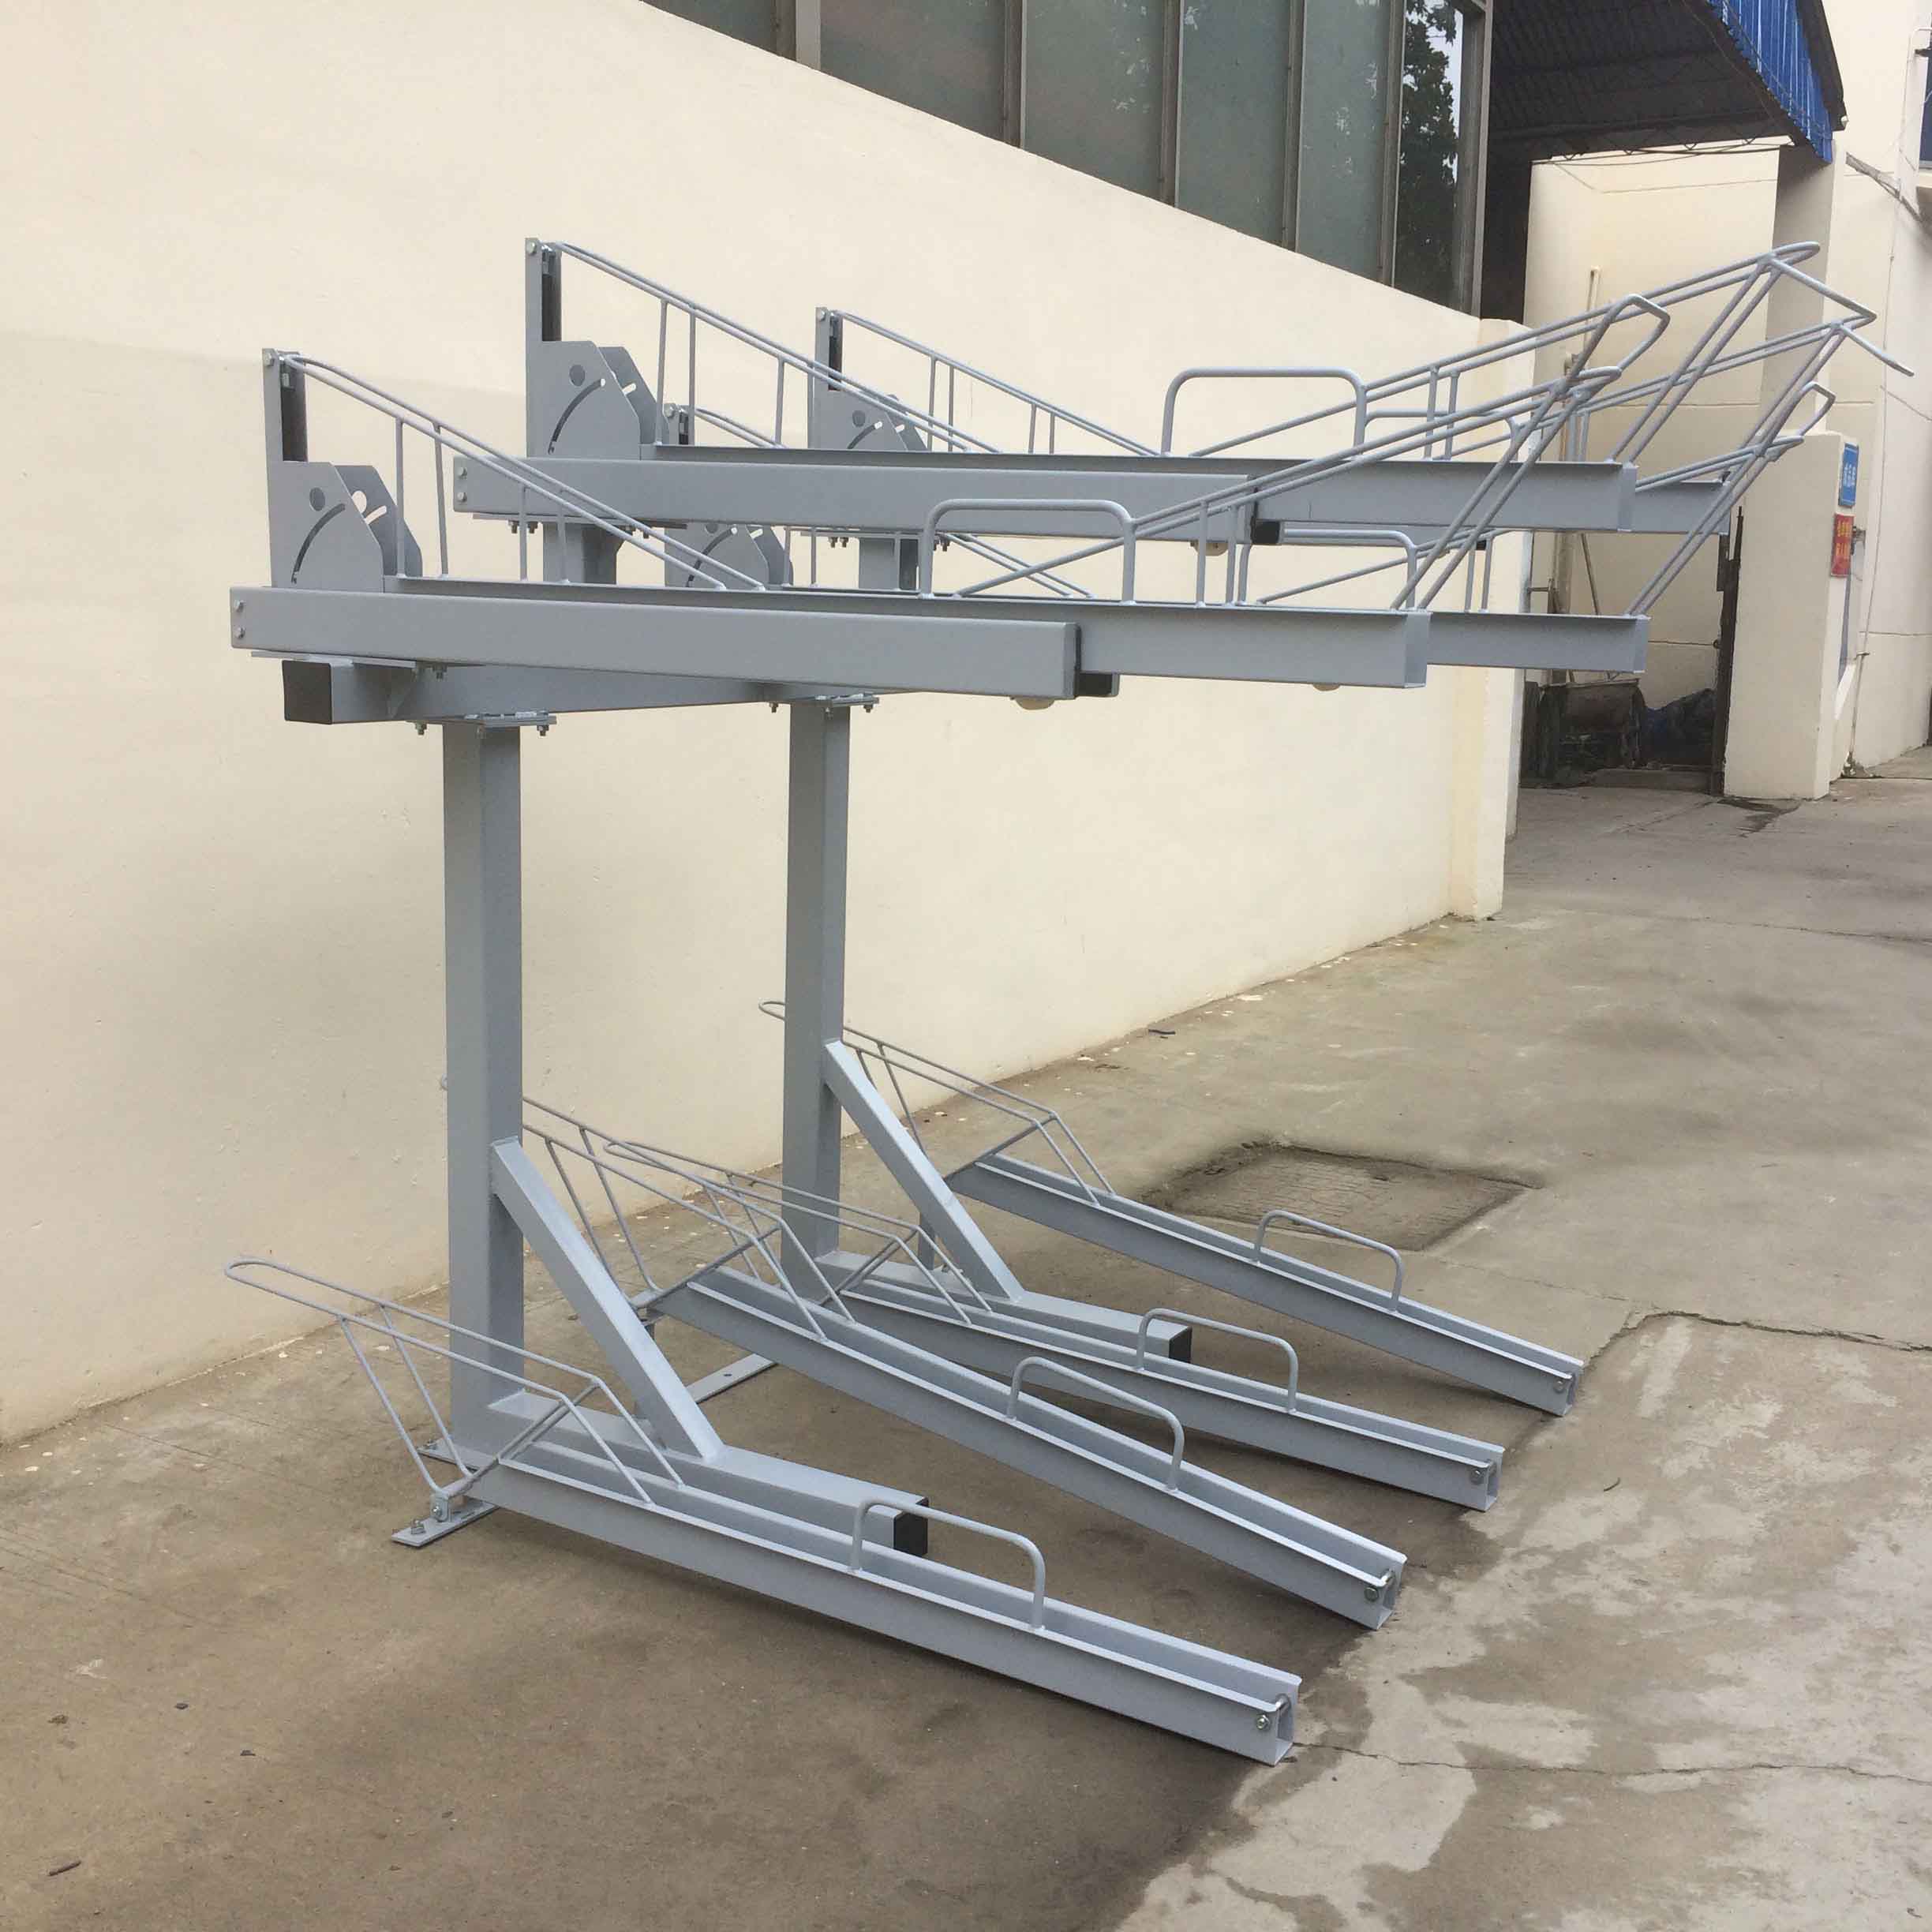 Customized Doule Deck Multiple Bike Parking Stand Rack for Garage